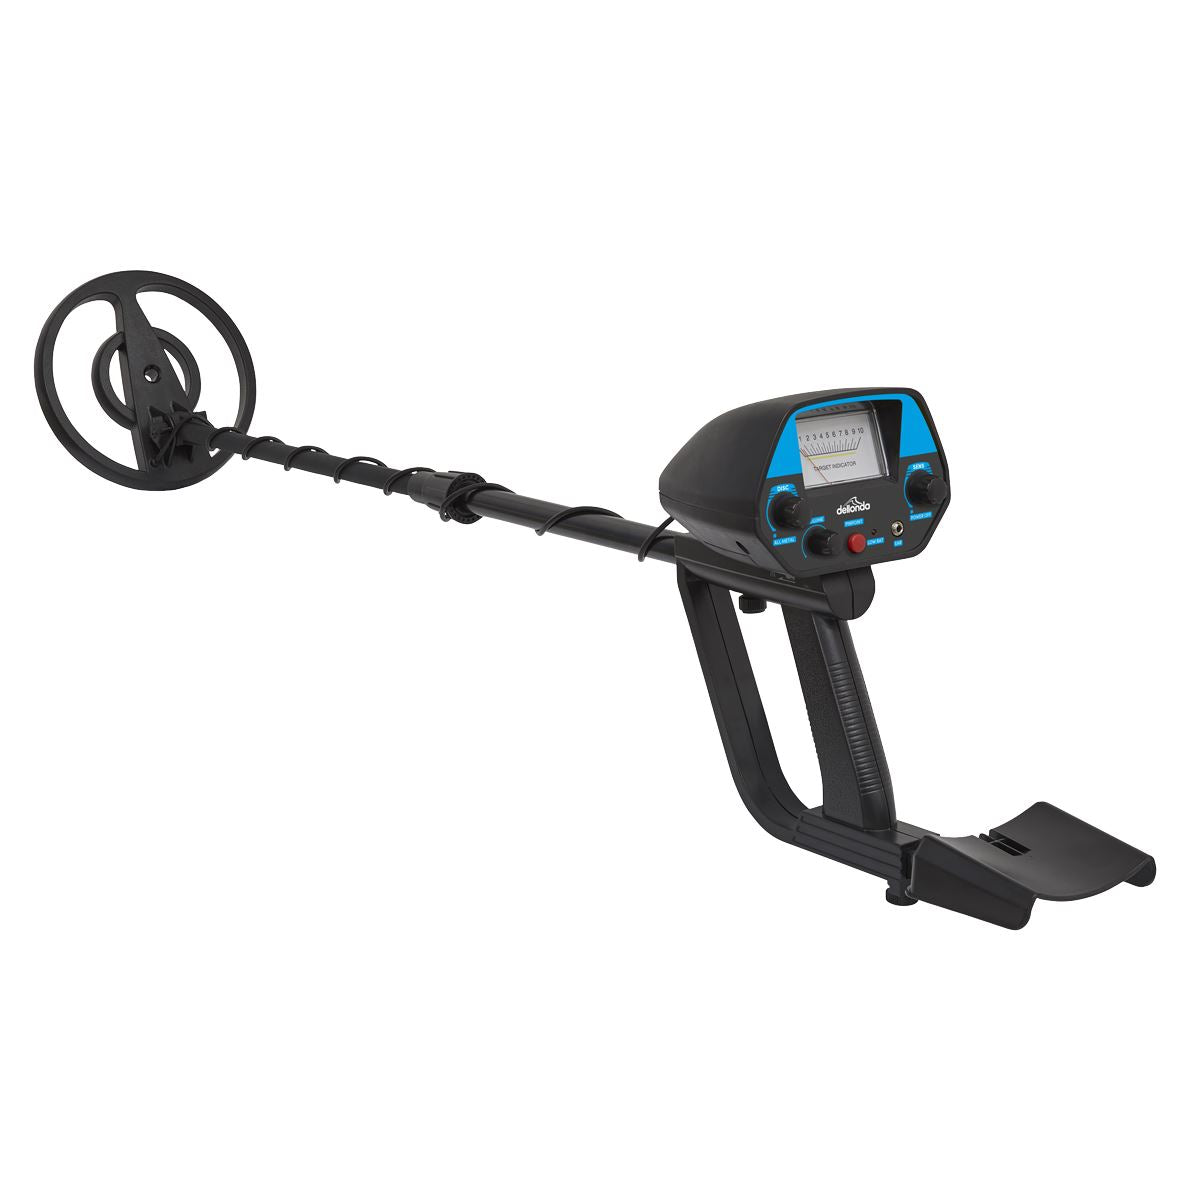 Dellonda Adults Metal Detector with High Accuracy Pinpoint Function - DL6